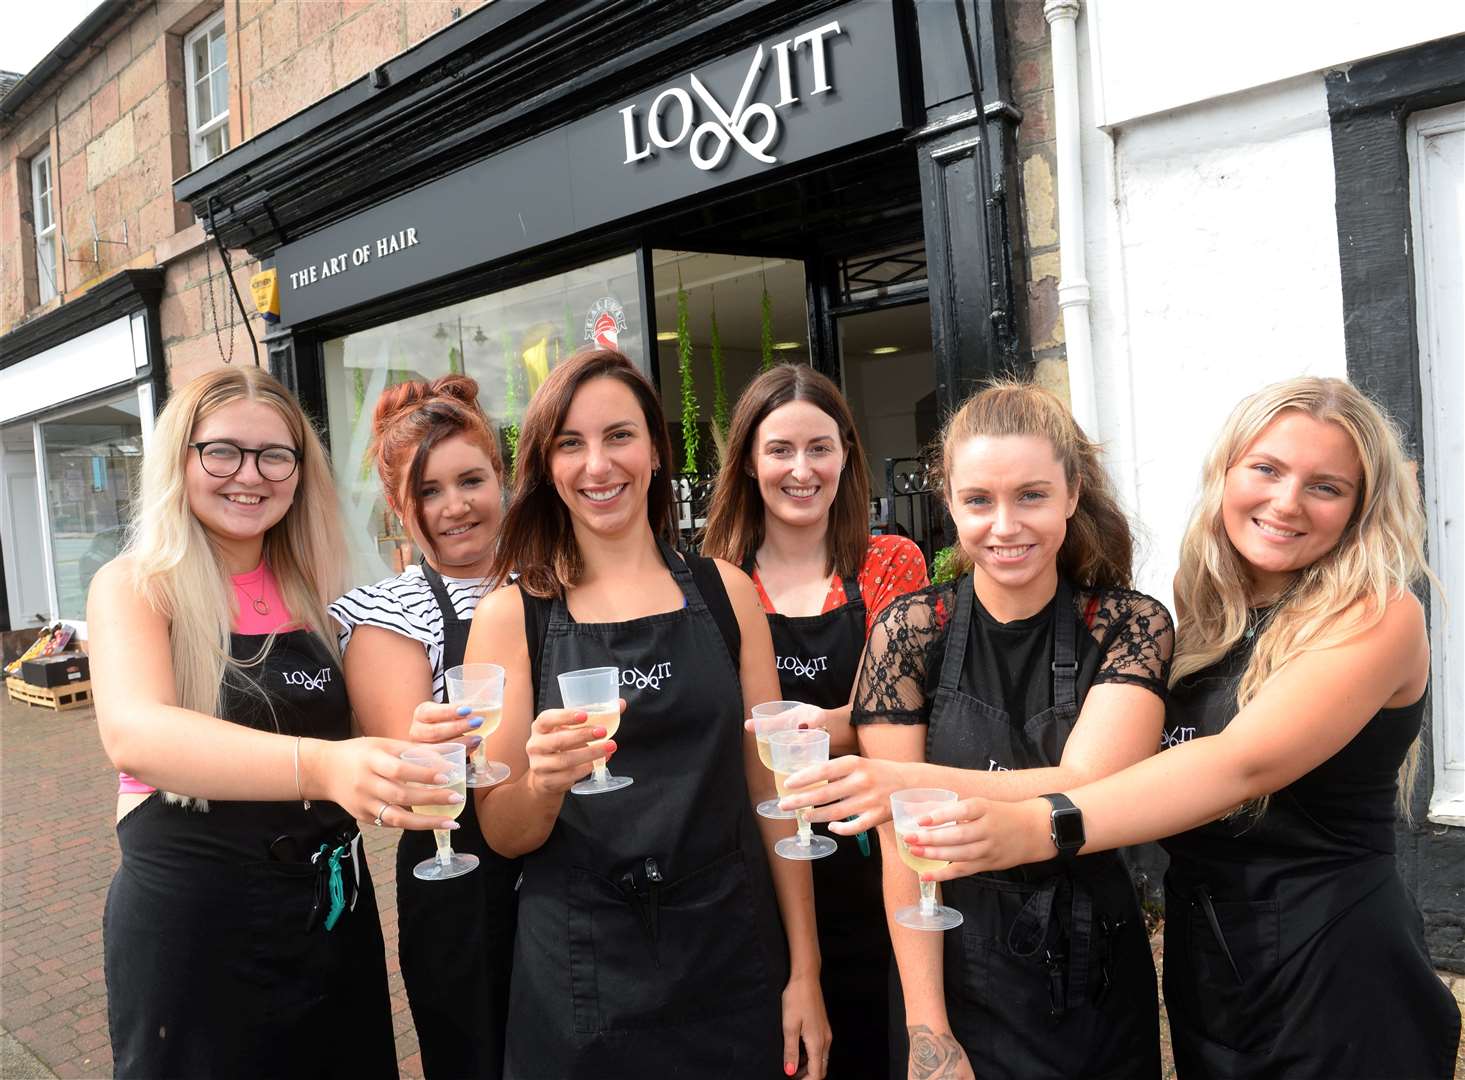 Celebrating the first anniversary of Lovit in Beauly are Courtney Birch, Adele Bartram, owner Laura Simpson, Rhanna Watson, Hannah Coote and Danielle Brownsword.